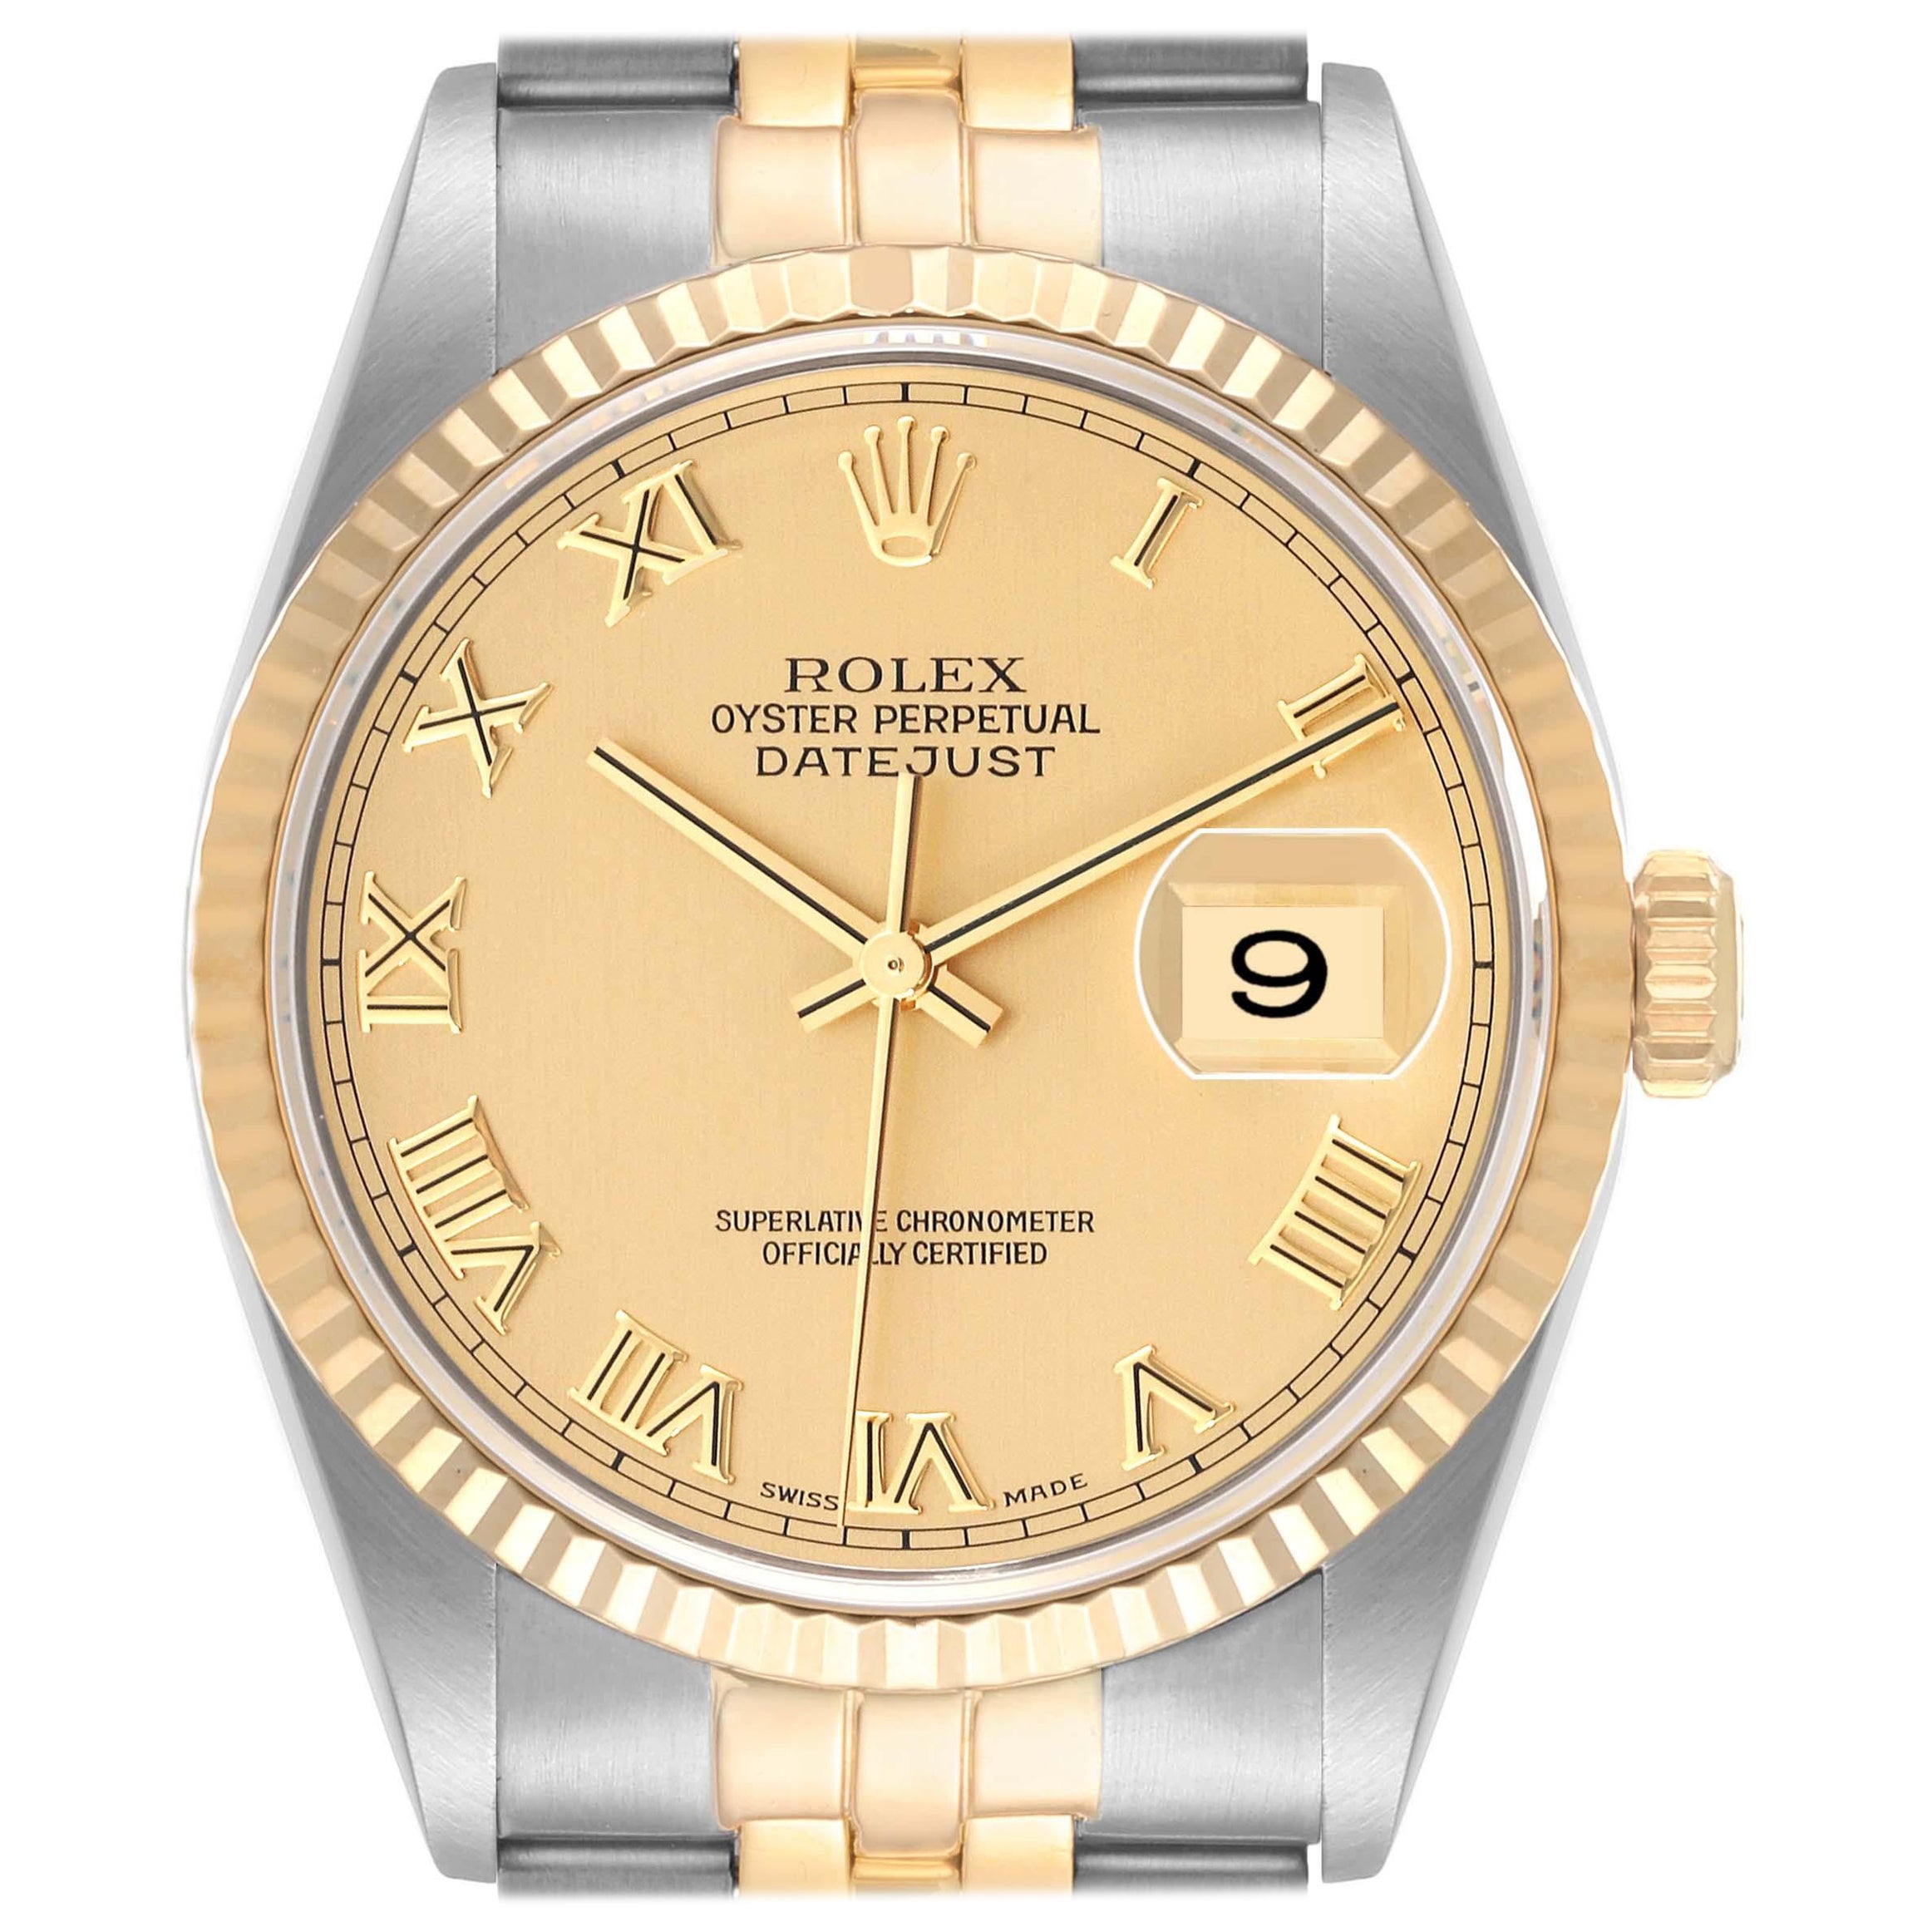 Rolex Datejust Steel Yellow Gold Champagne Dial Mens Watch 16233 For Sale